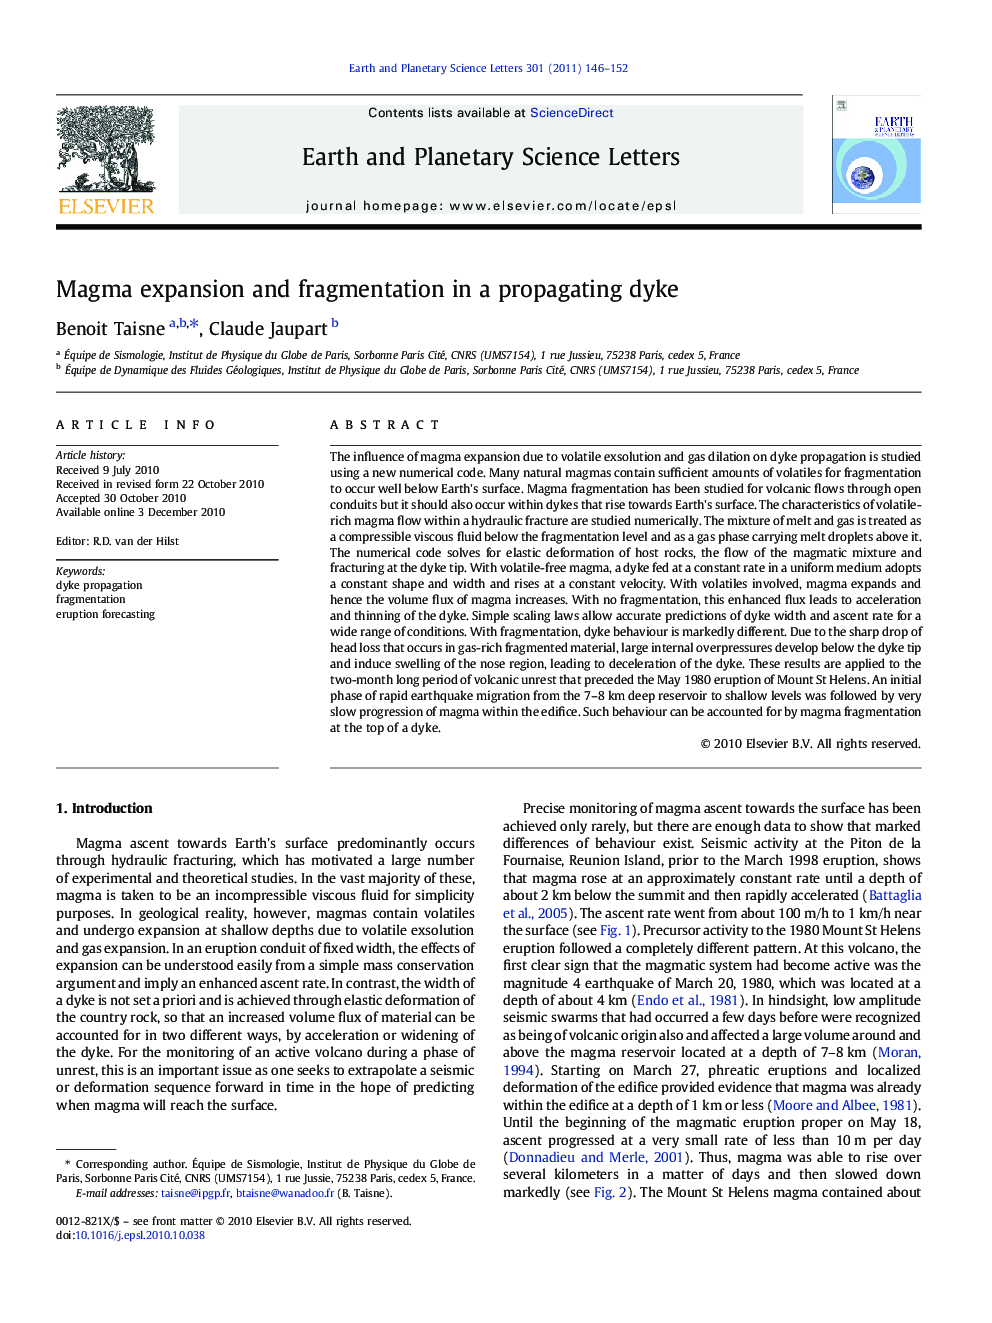 Magma expansion and fragmentation in a propagating dyke